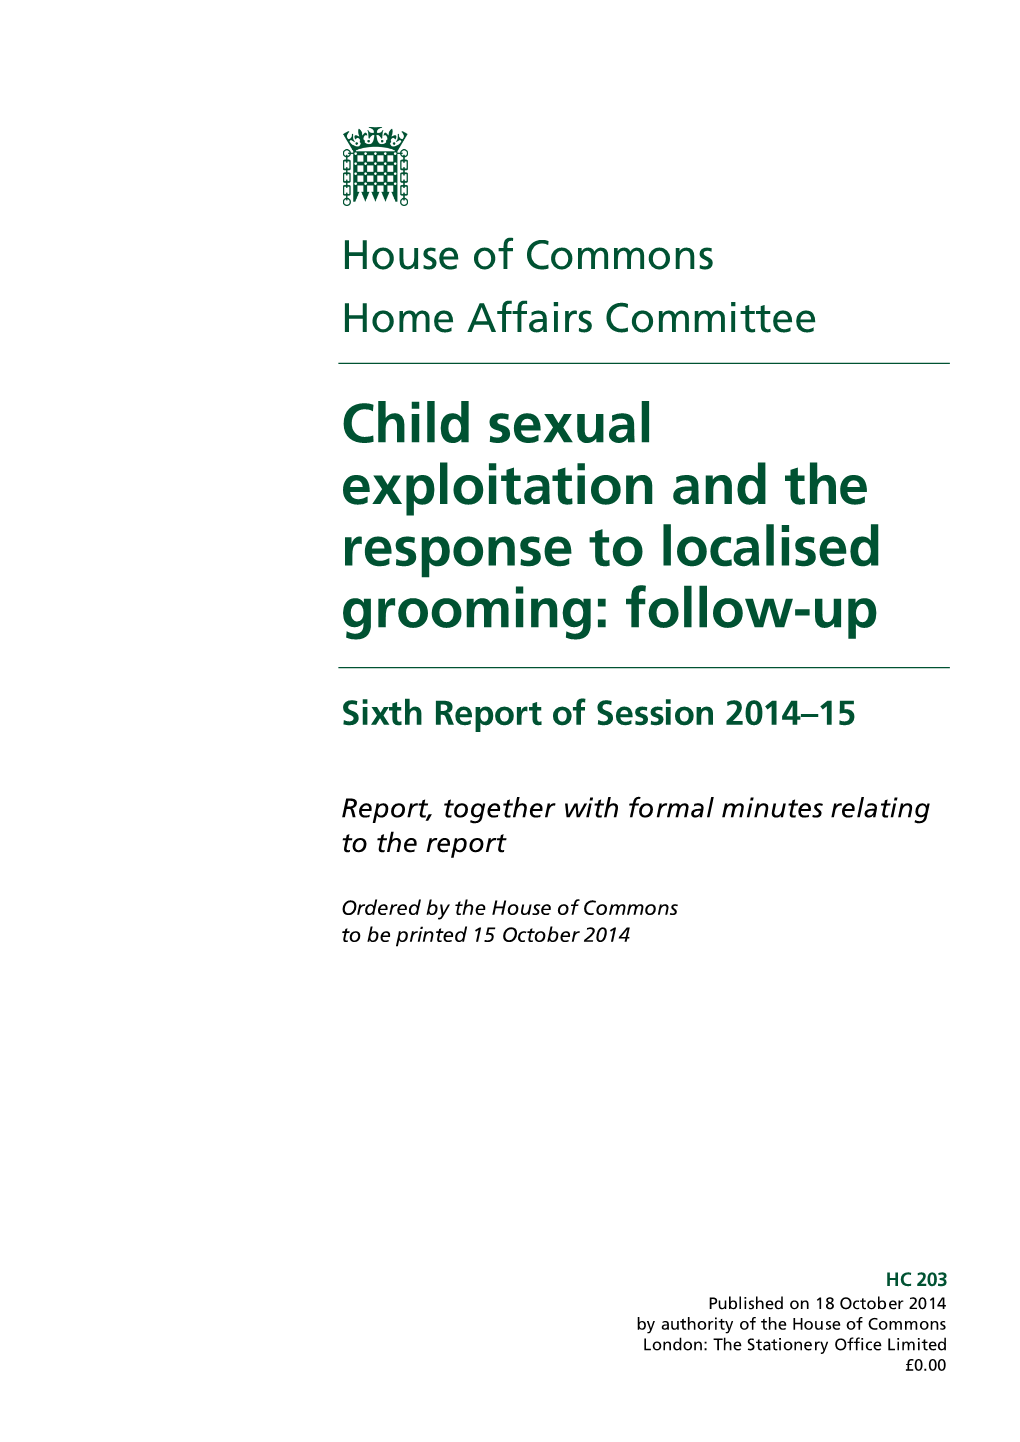 Child Sexual Exploitation and the Response to Localised Grooming: Follow-Up